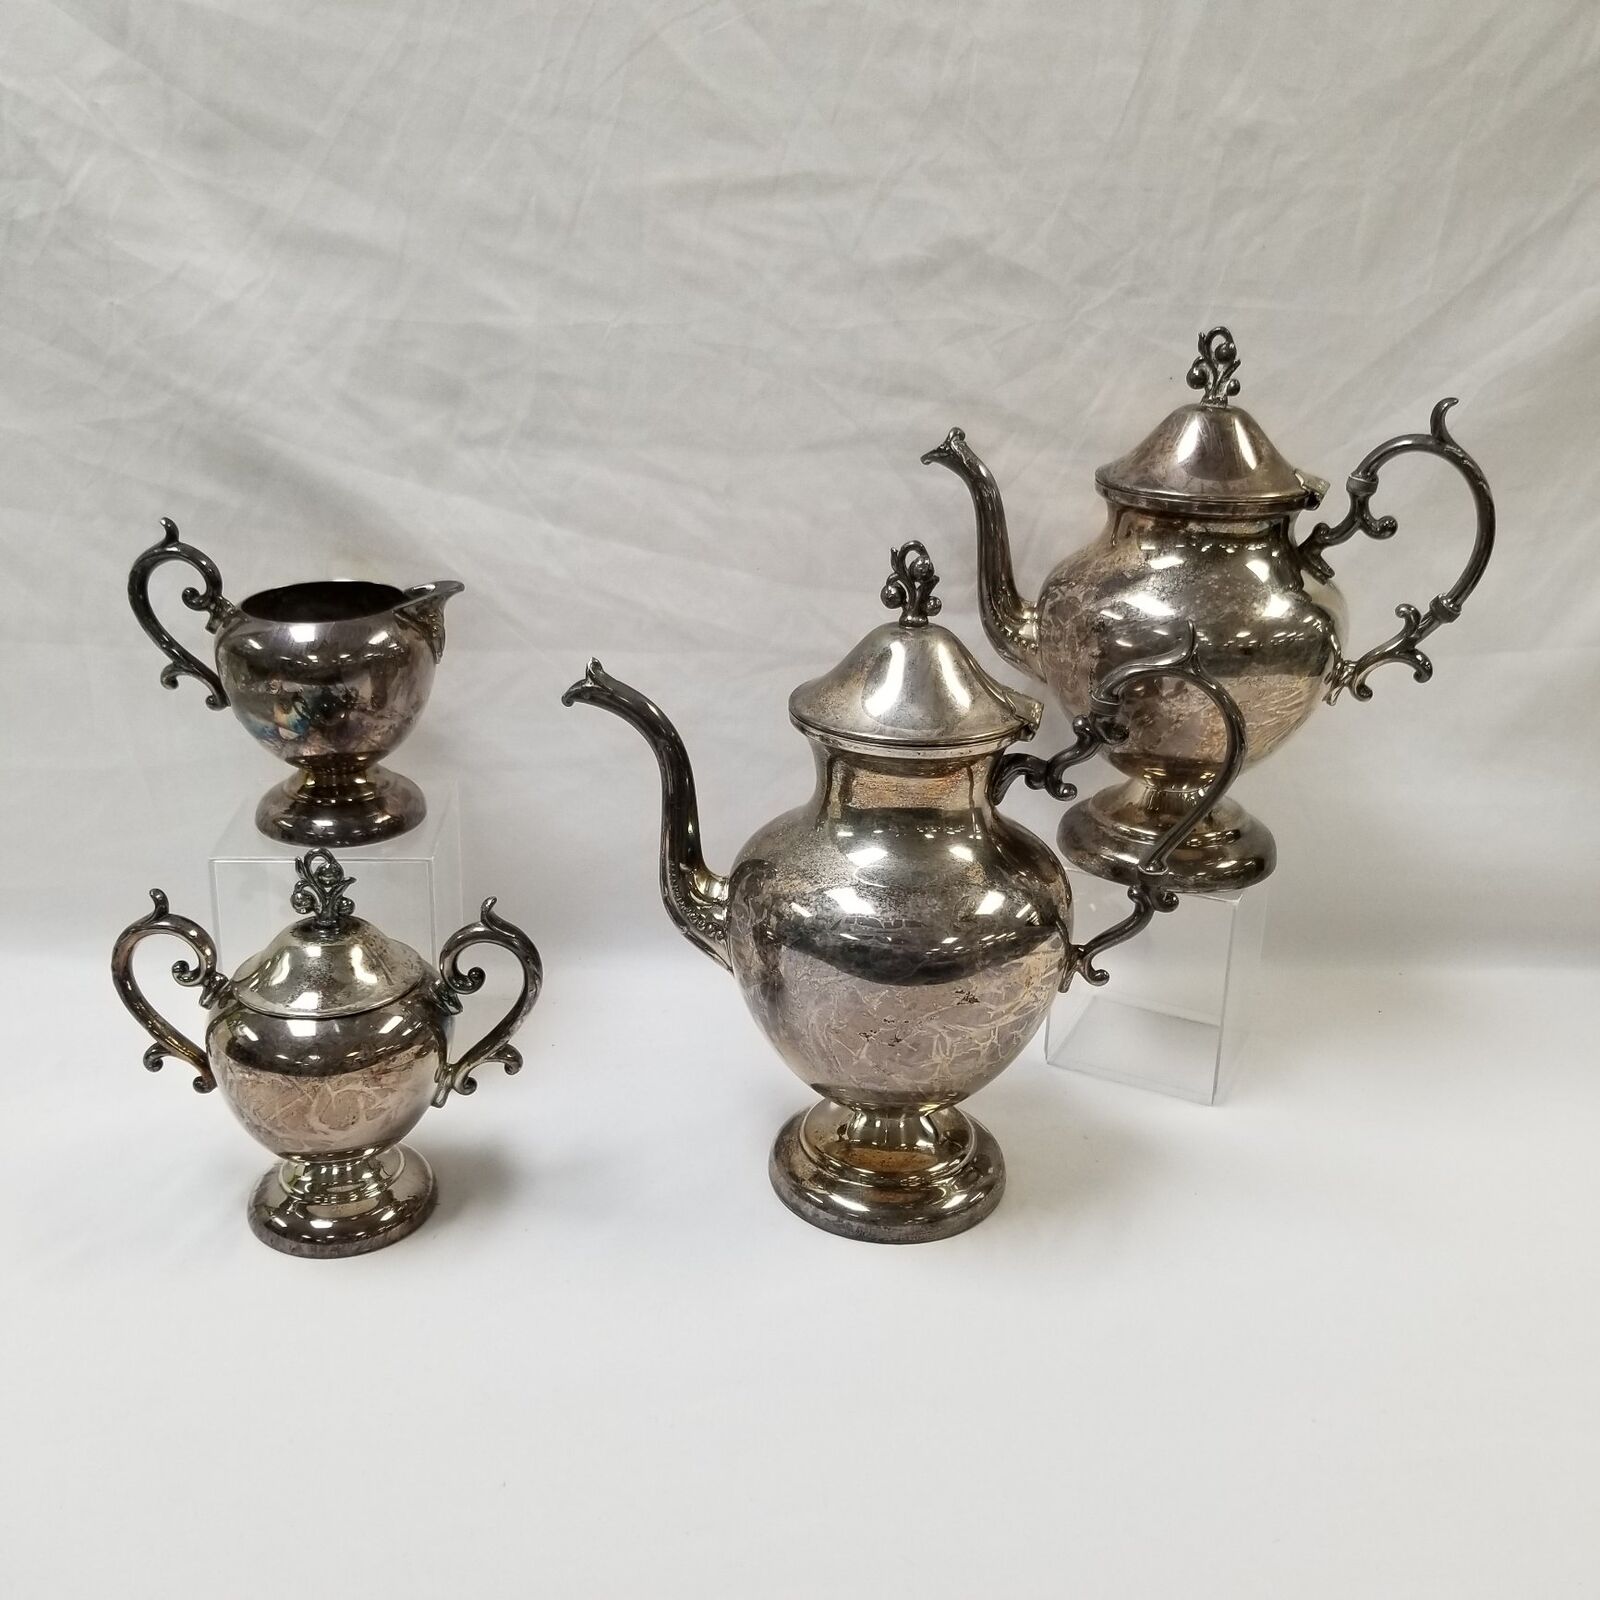 4pc Lot of Vintage Silver Plate on Copper Teapots w/ Creamer & Sugar Bowl